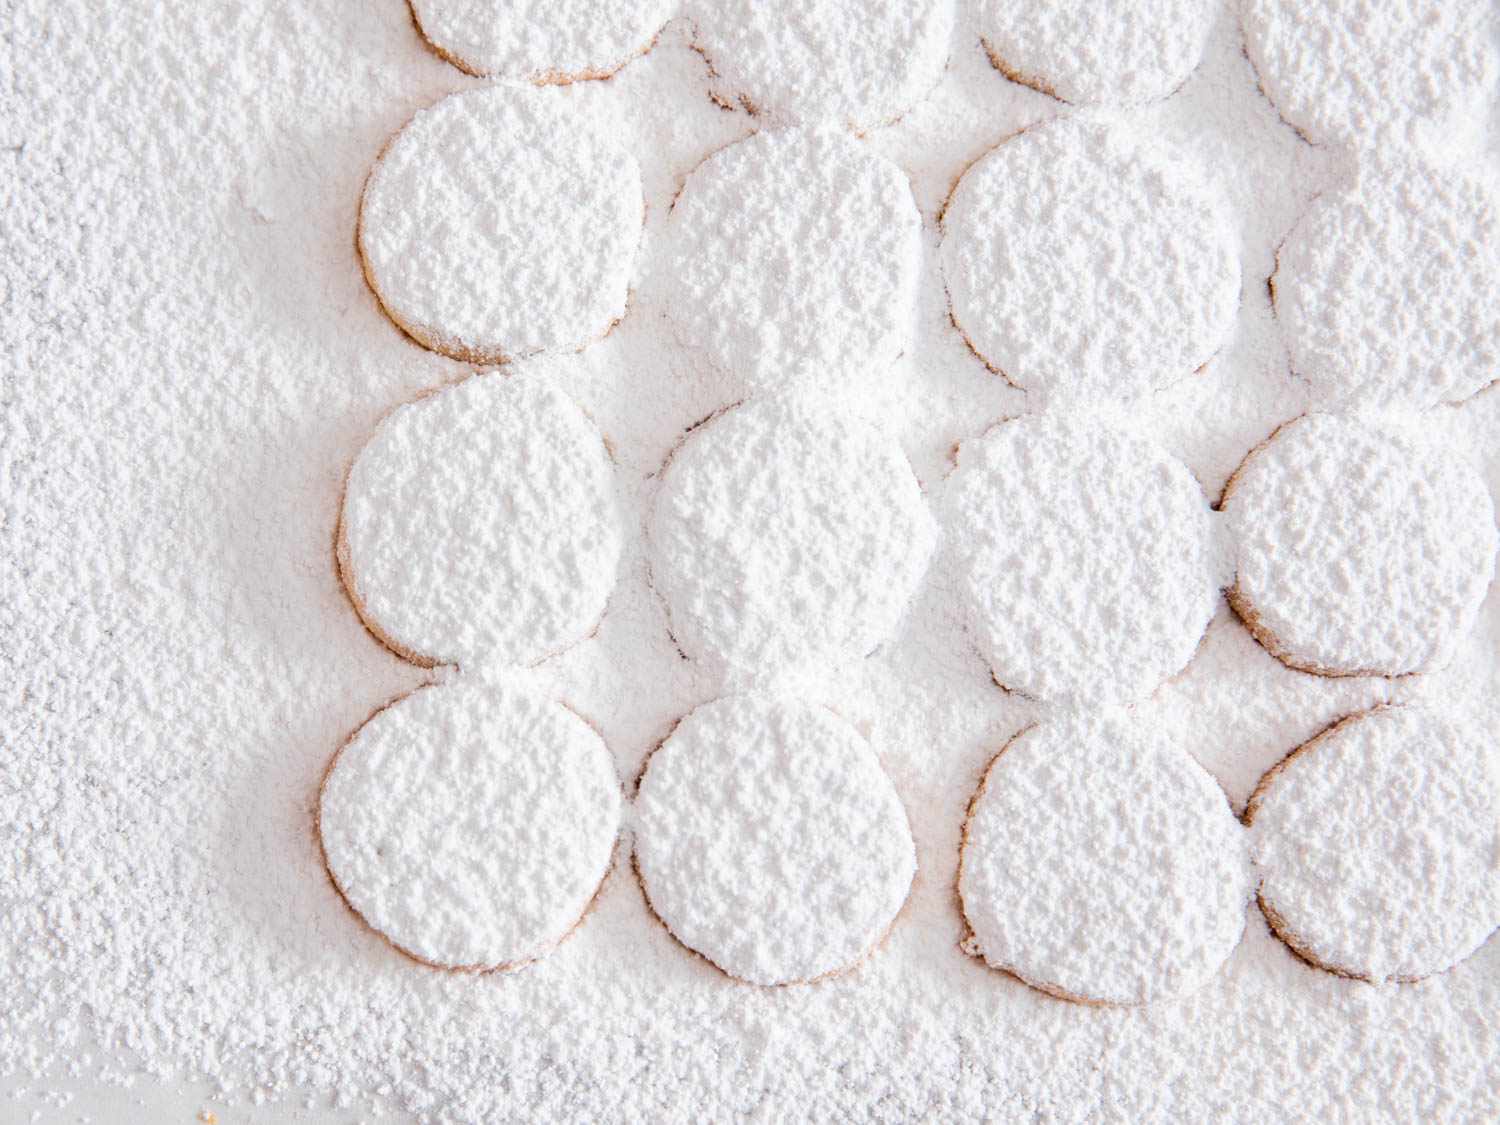 Rows of lemon meltaway cookies covered in a heavy layer of powdered sugar